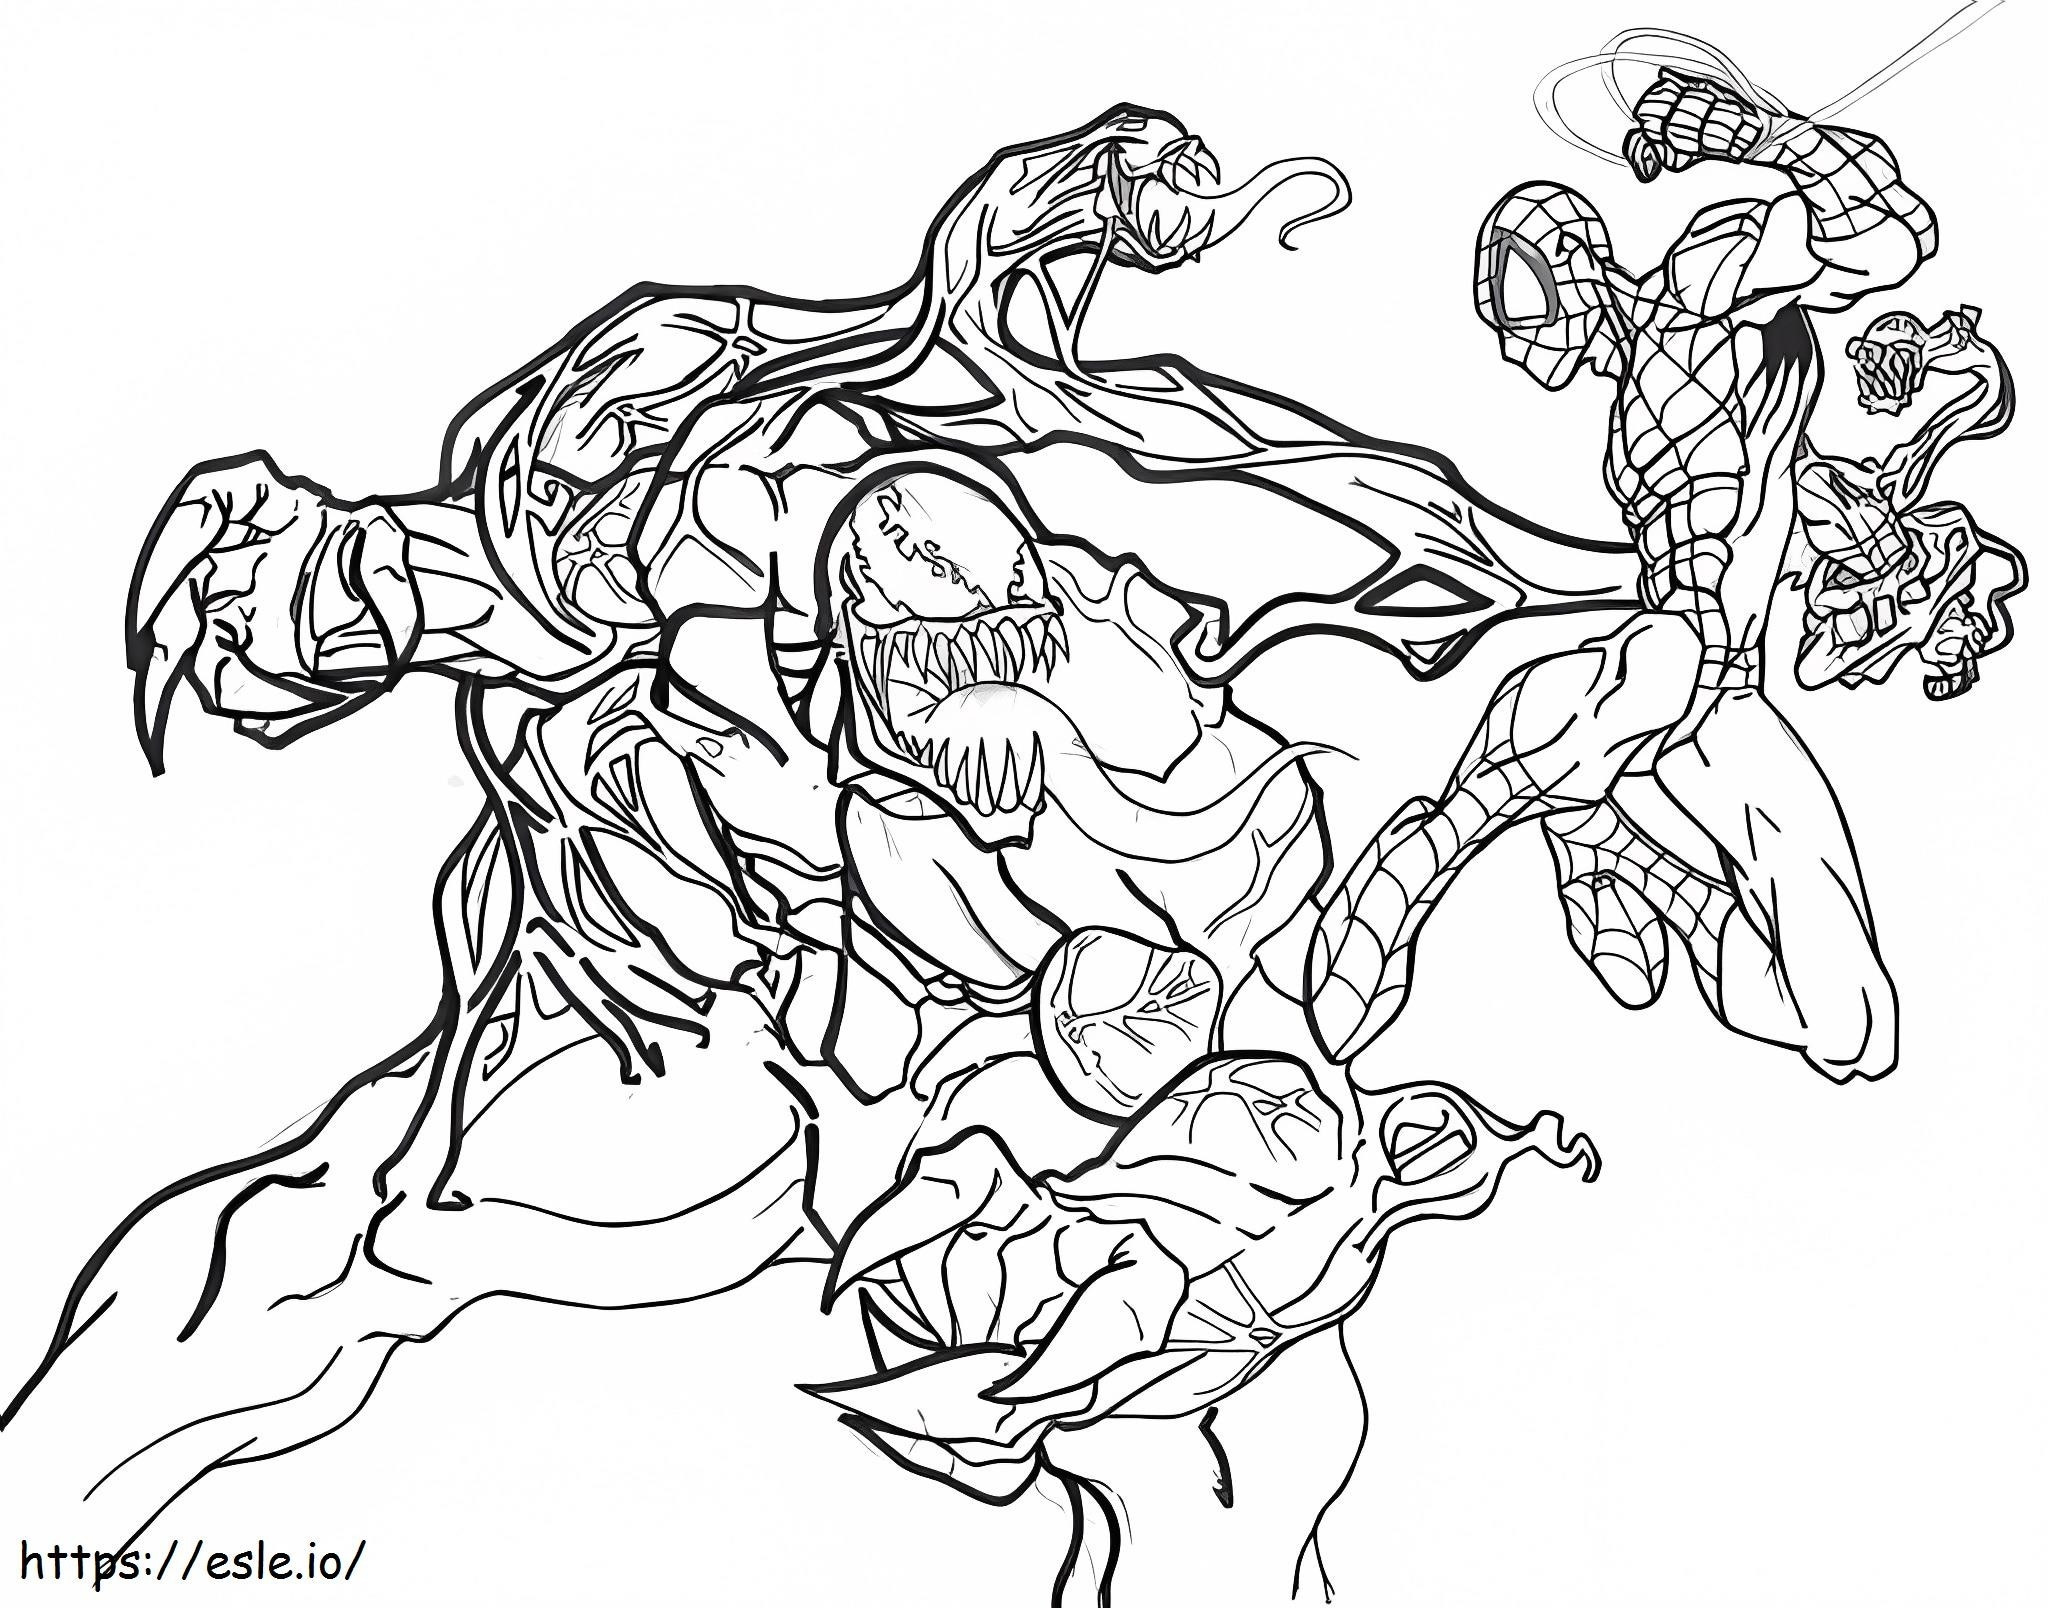 Venom And Spiderman coloring page